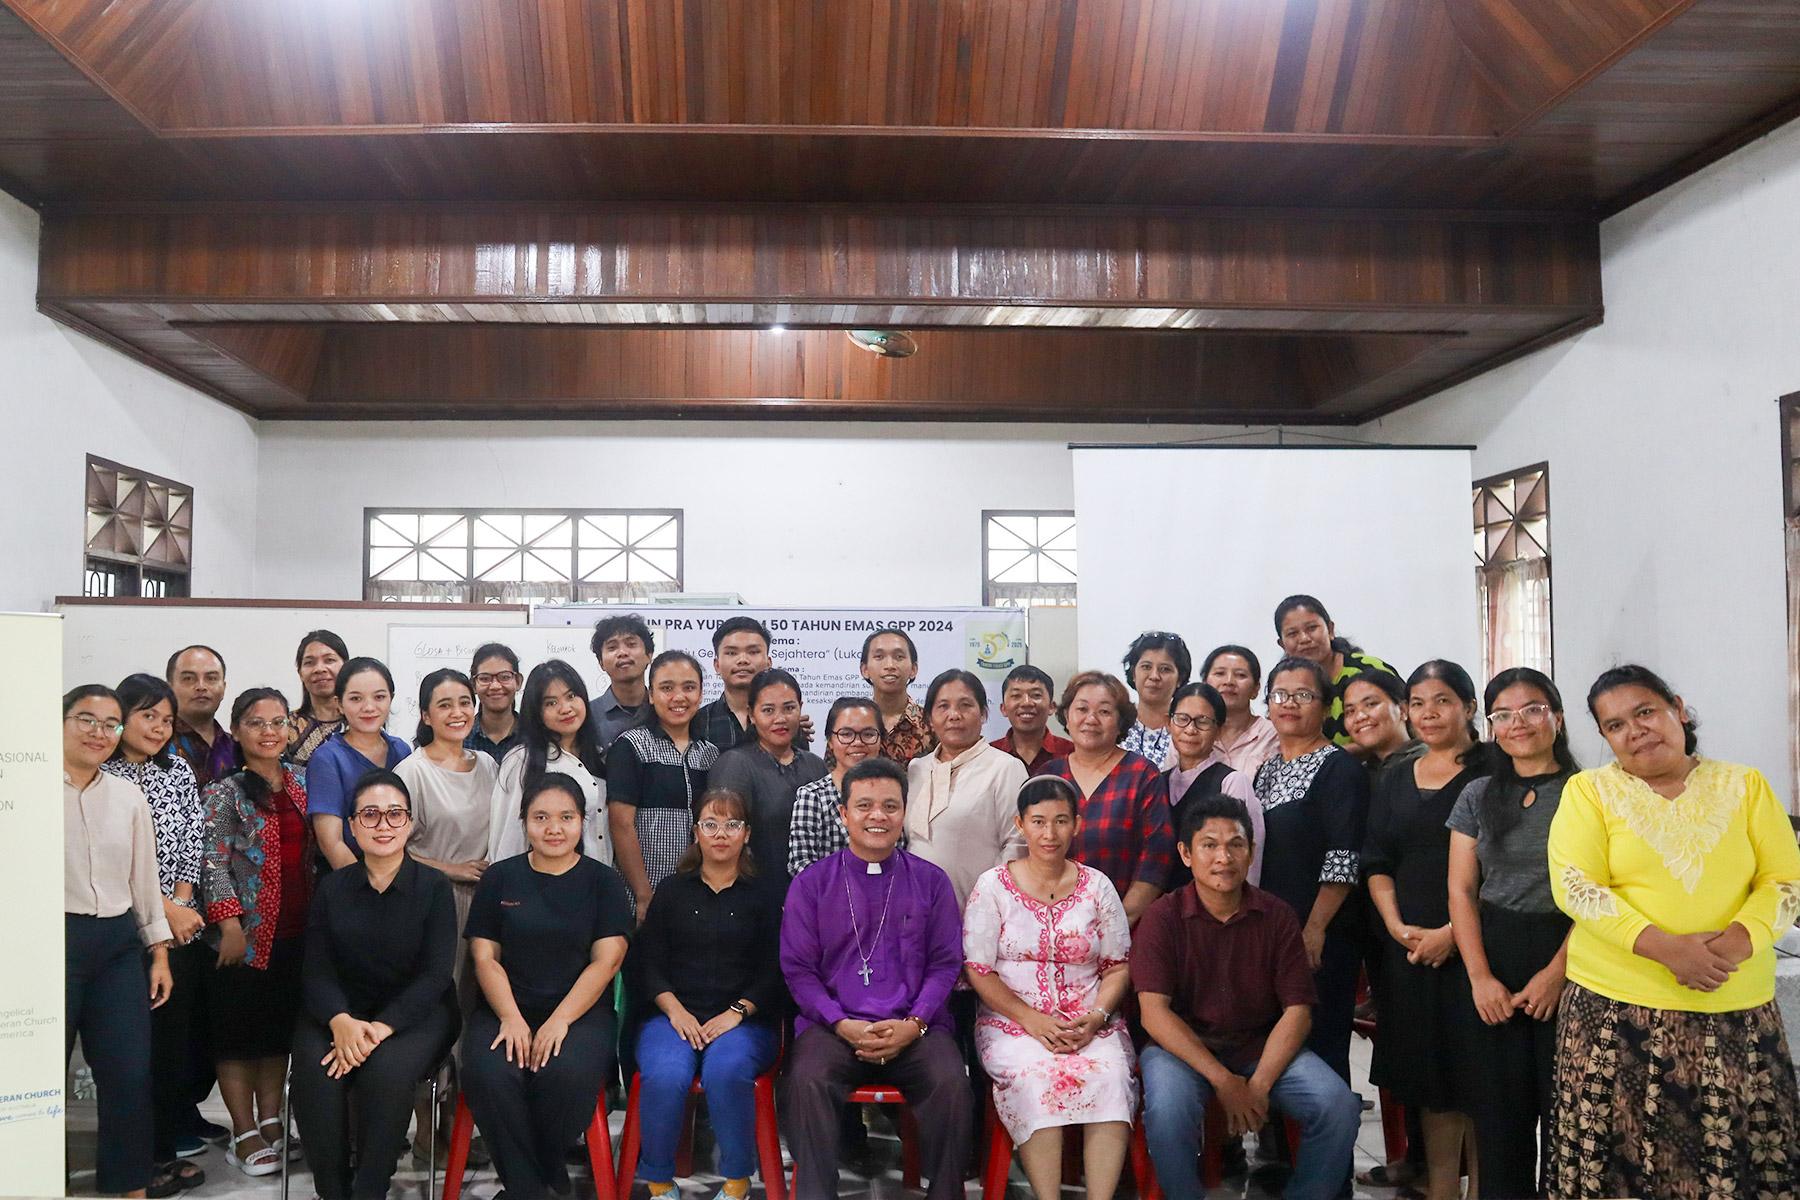 Participants and lecturers of the workshop on creating an inclusive church welcoming people with disabilities, particularly the deaf. Photo: KN-LWF